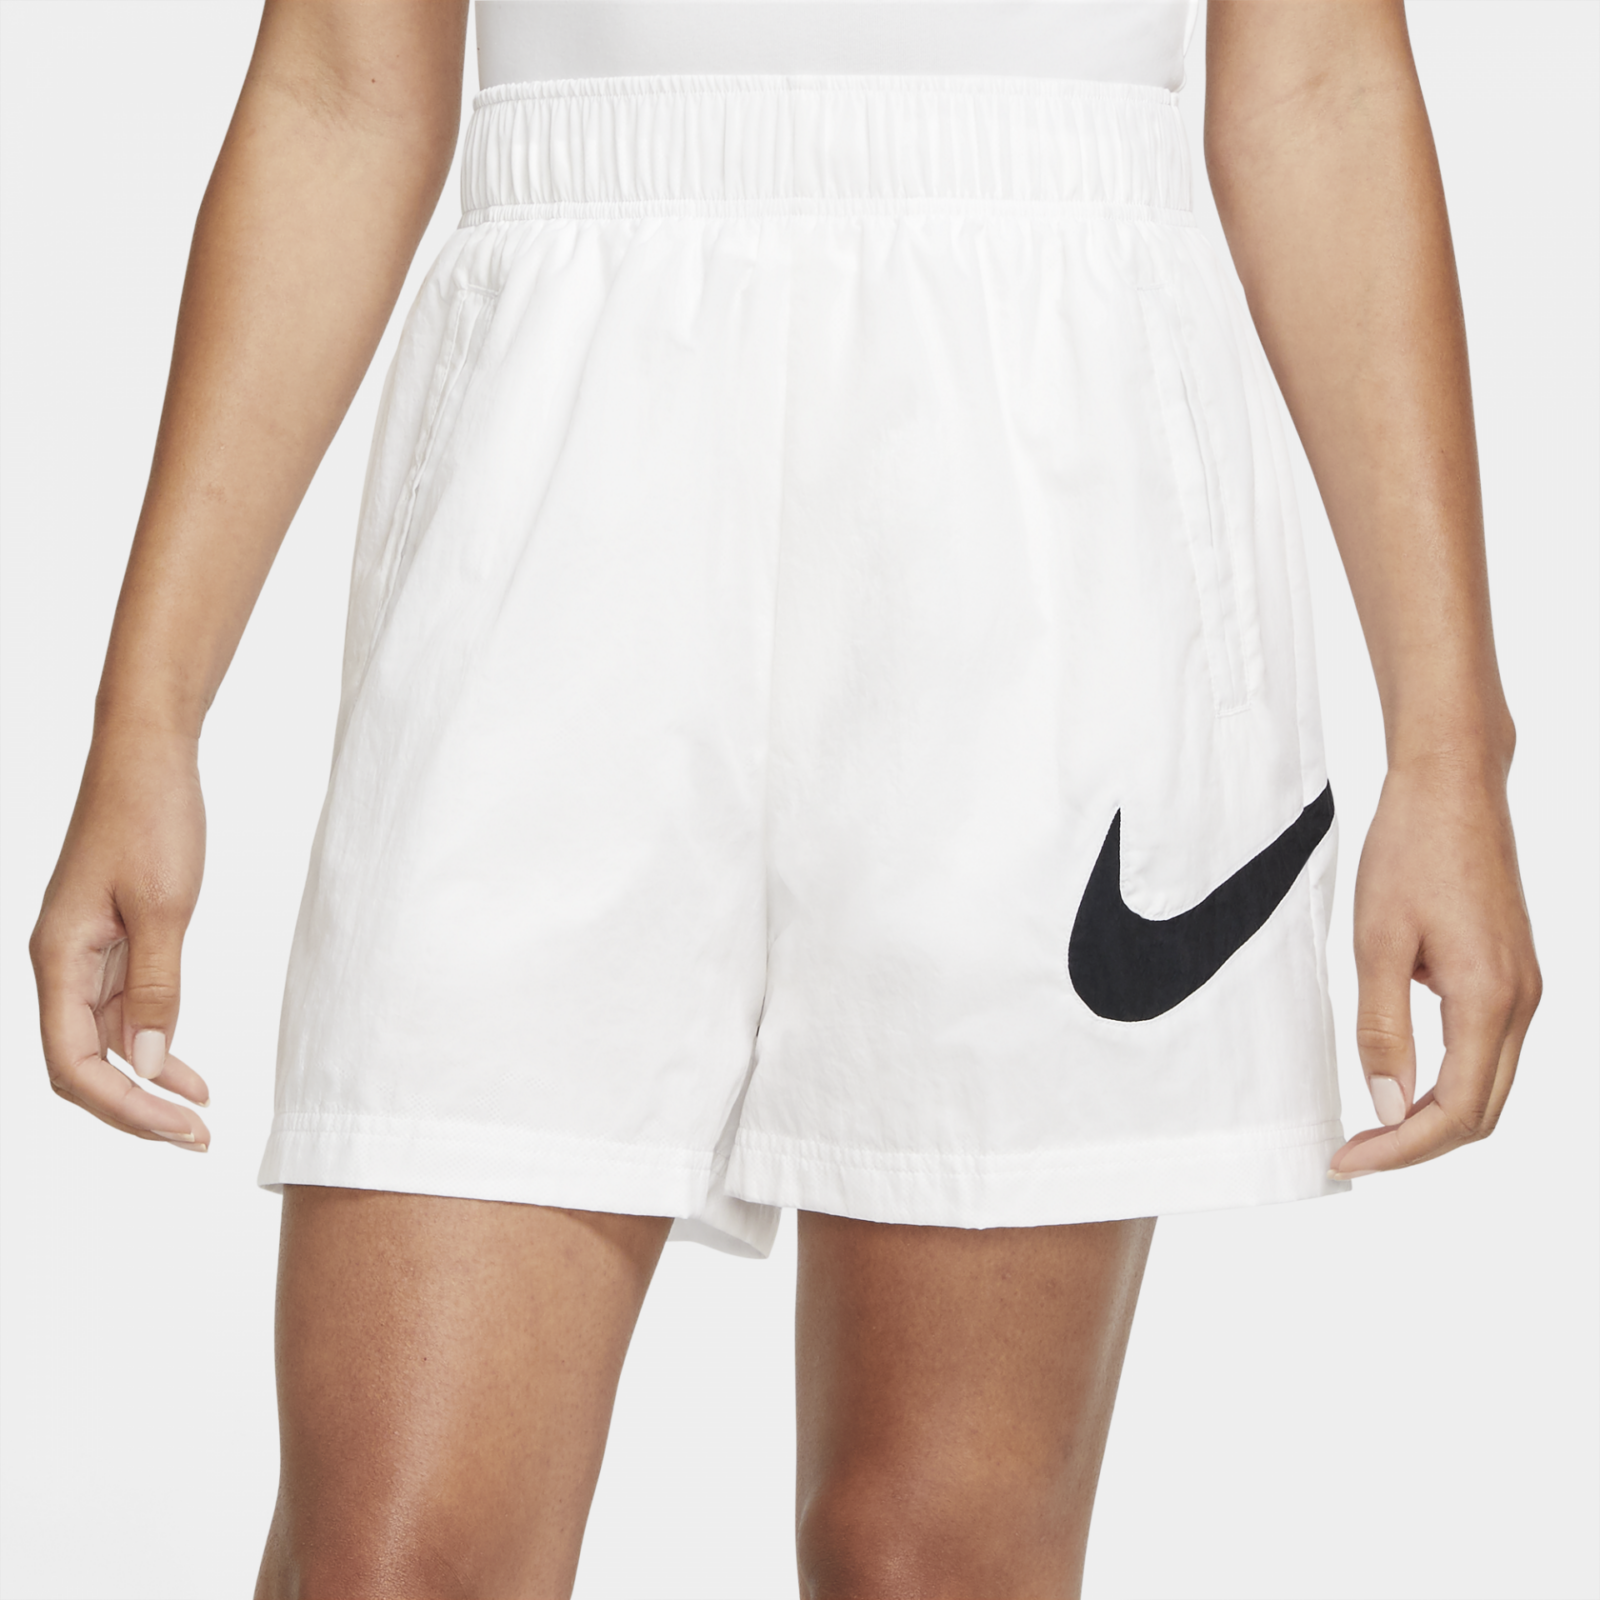 Nike Woman's Shorts Essential